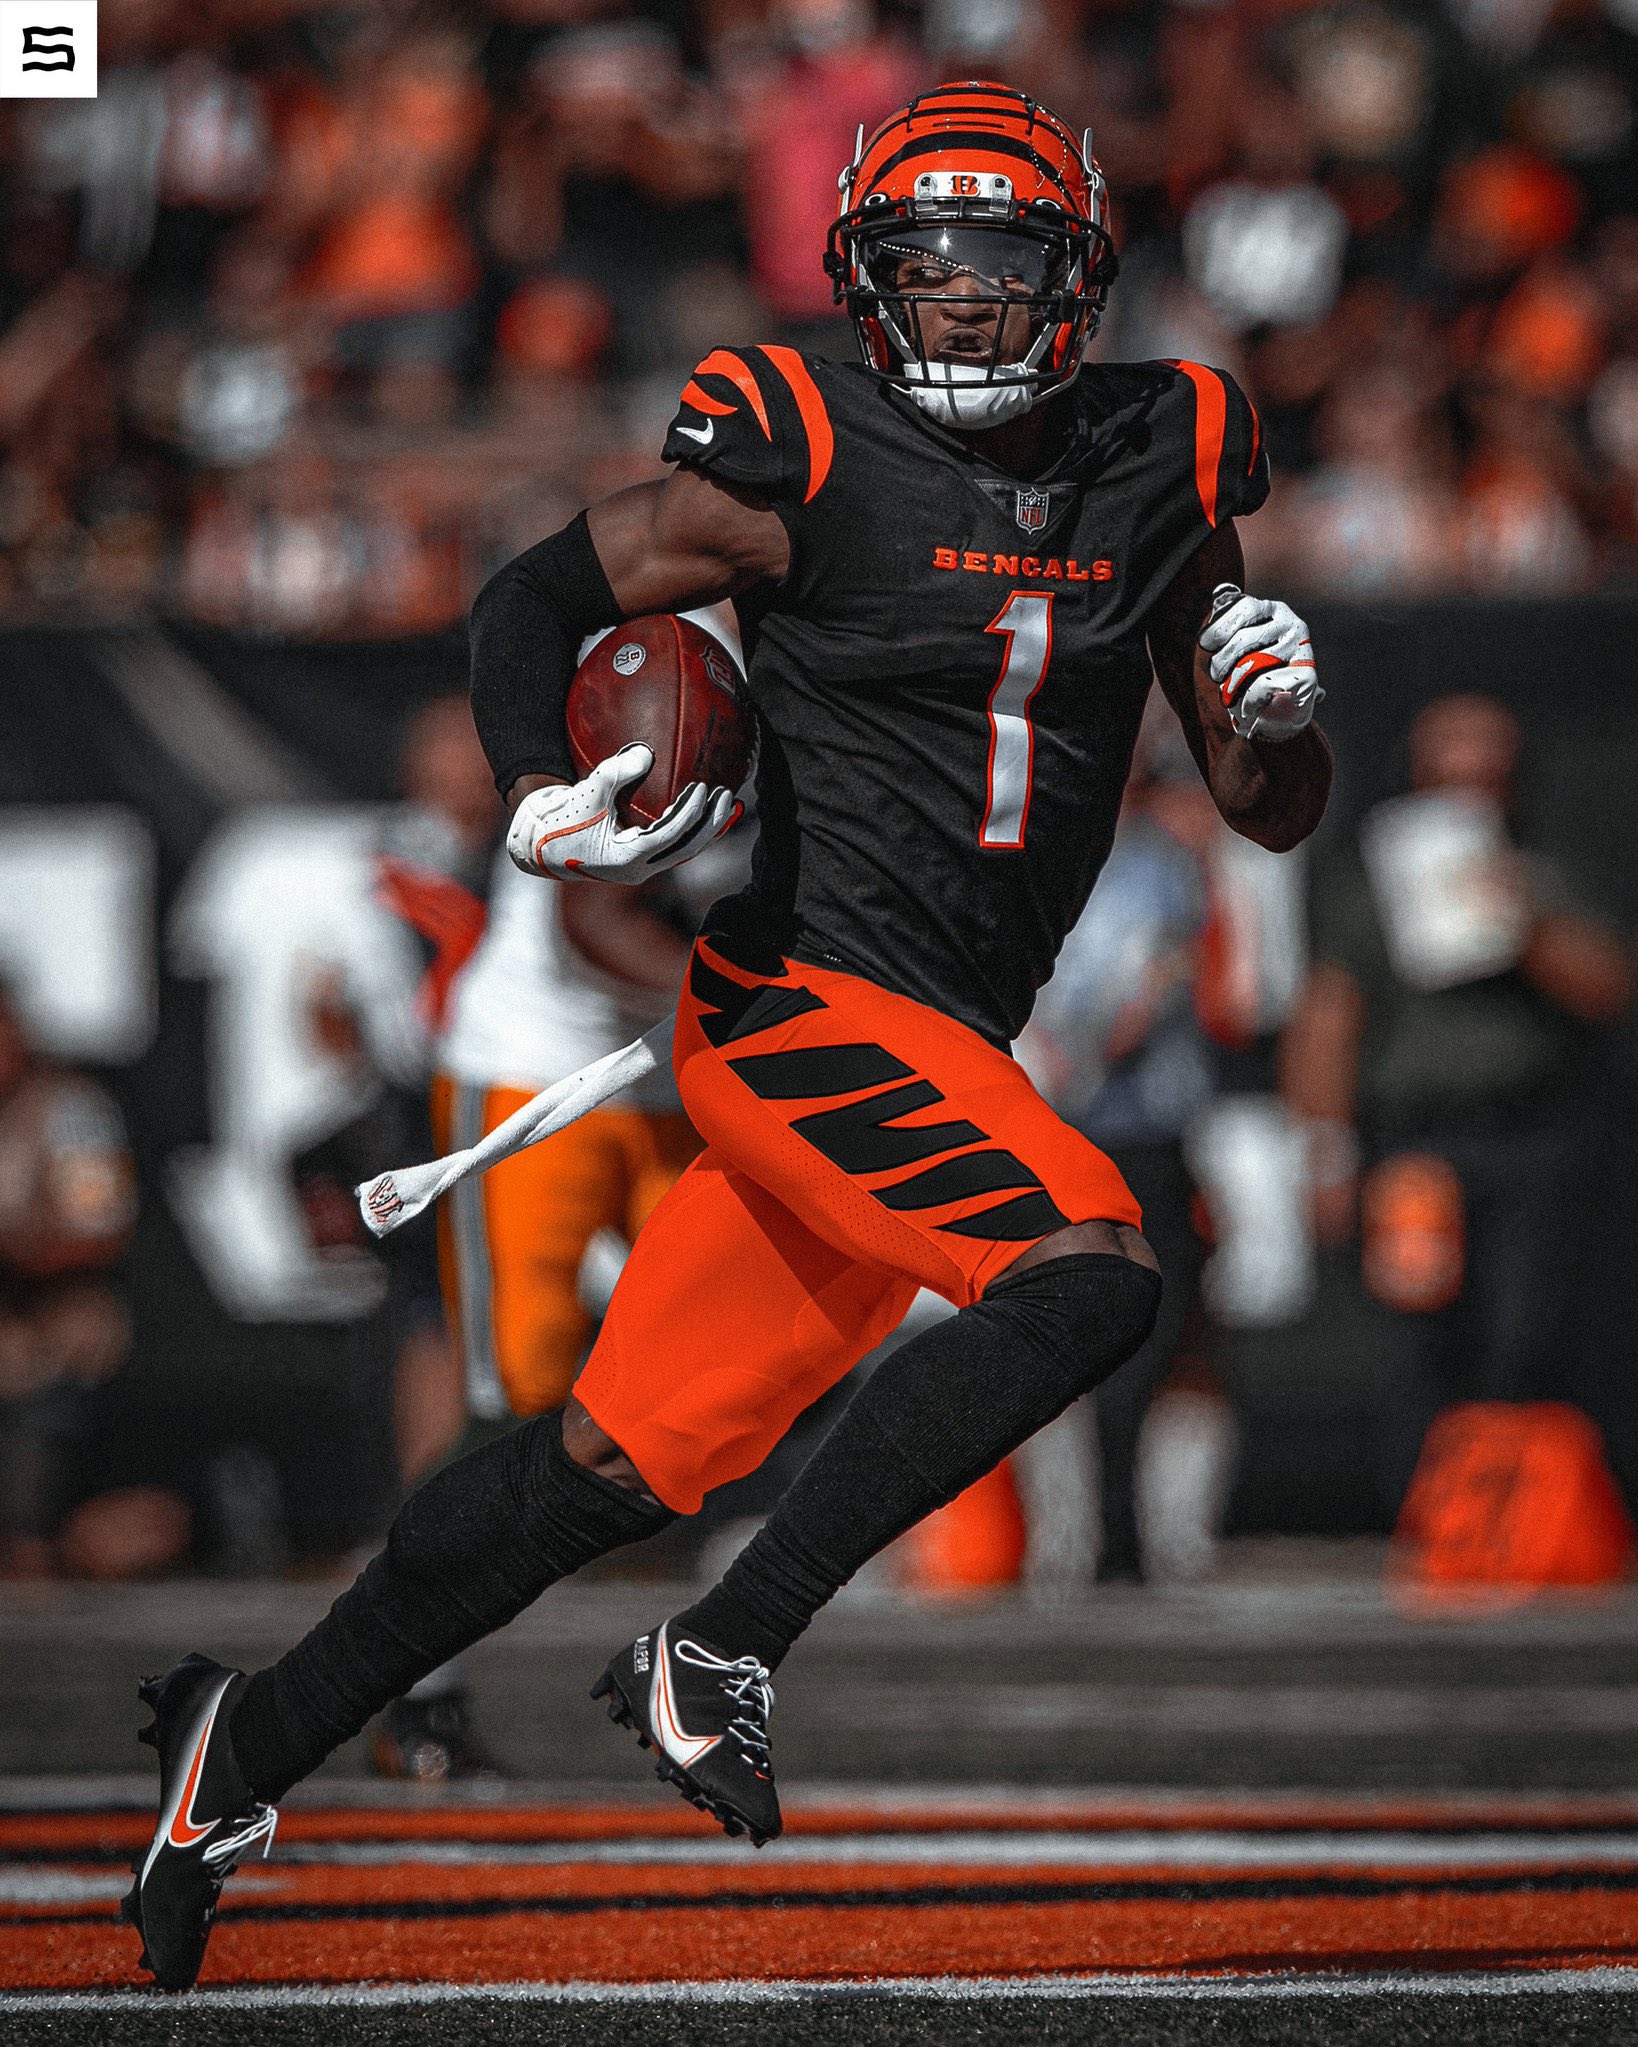 Bengals Ben 🐅 on X: RT if you think the @bengals should add these  alternate orange pants to the uniforms for next season🔥   / X